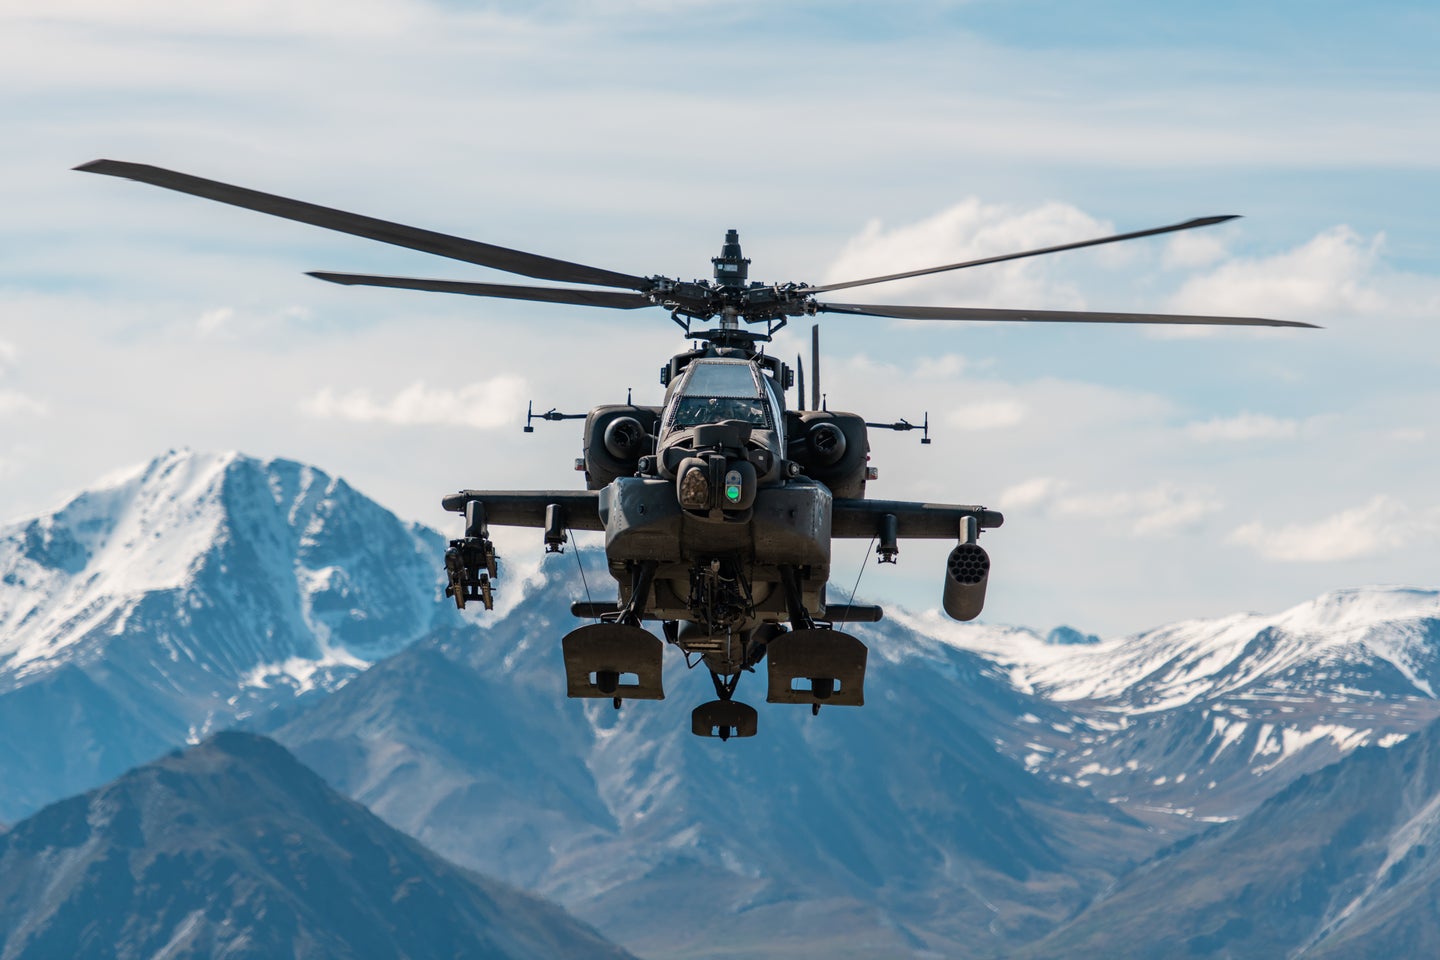 U.S. Army AH-64D Apache Longbow attack helicopter assigned to 1st Battalion, 25th Aviation Regiment Attack Reconnaissance Battalion (ARB), June 3, 2019. (U.S. Army)